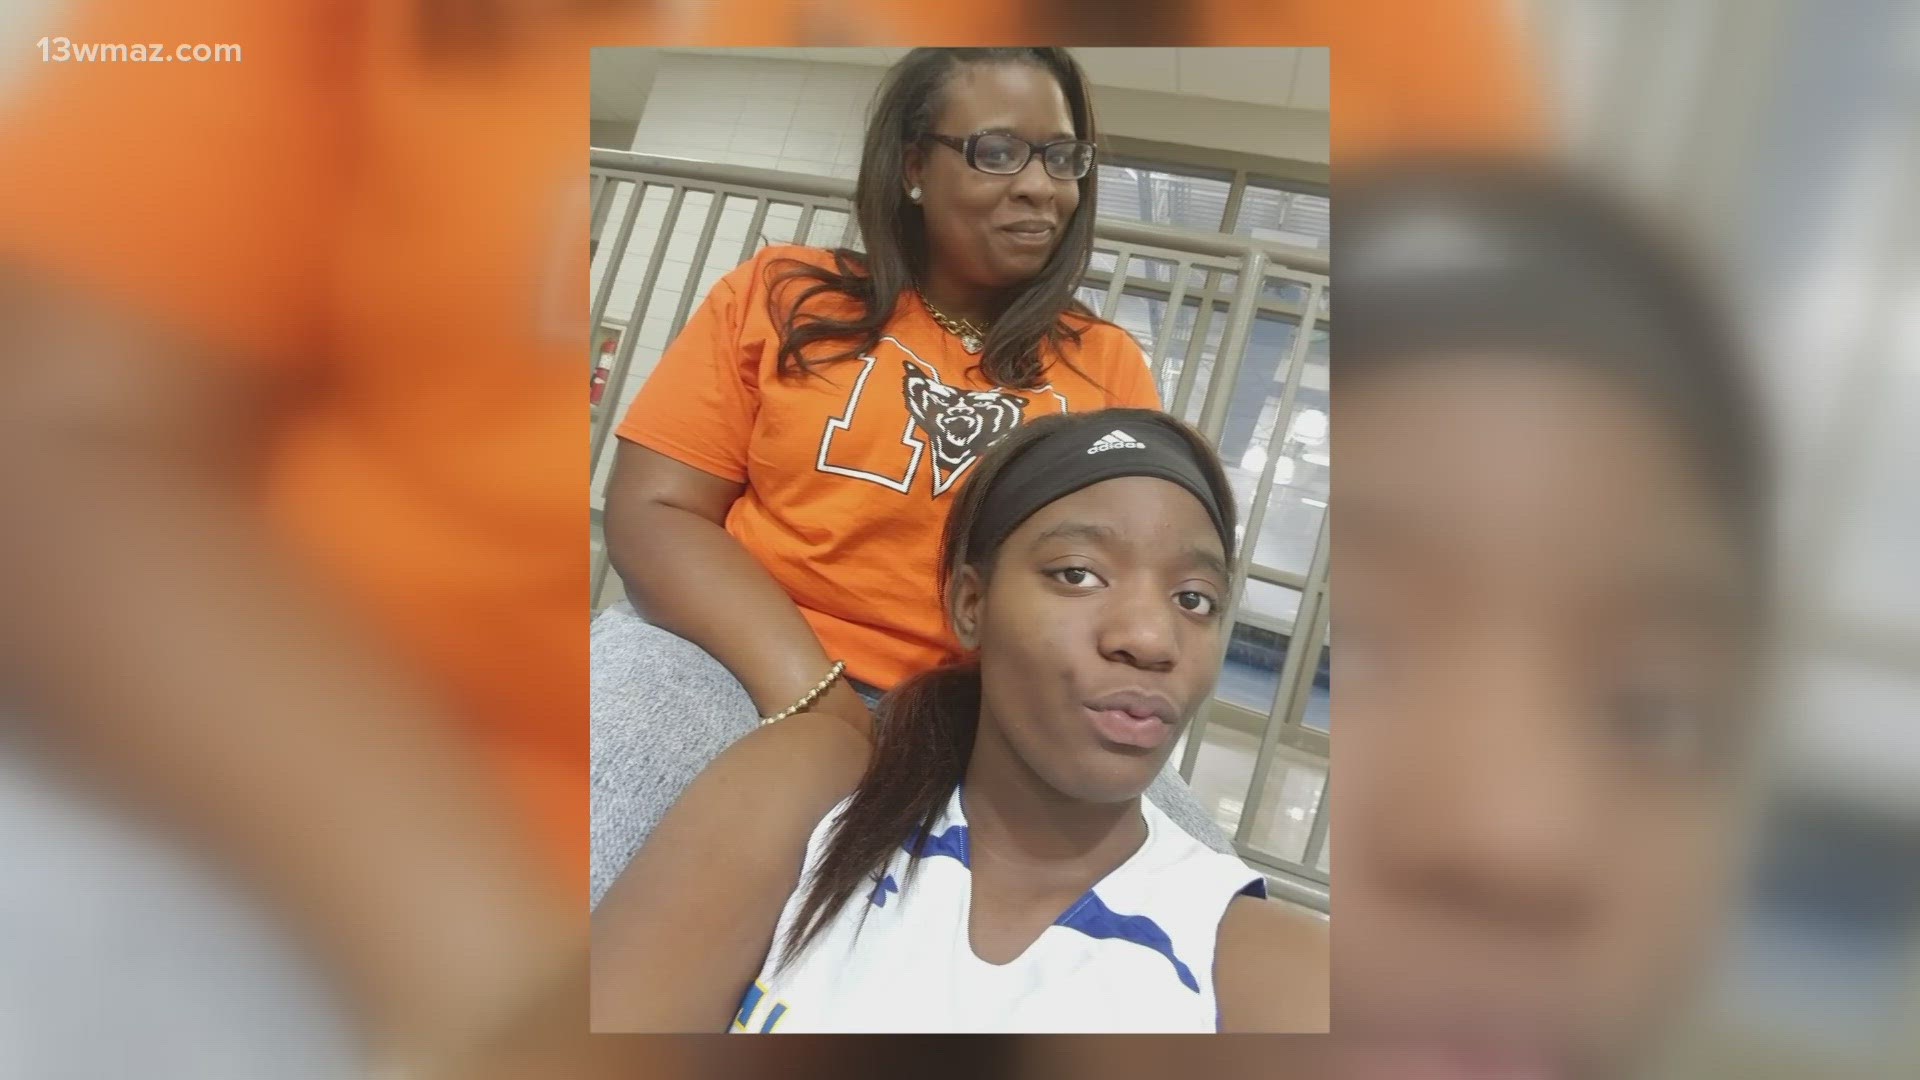 A Macon mom is graduating from Mercer University with her master's degree and her daughter is graduating from Tattnall Square Academy.